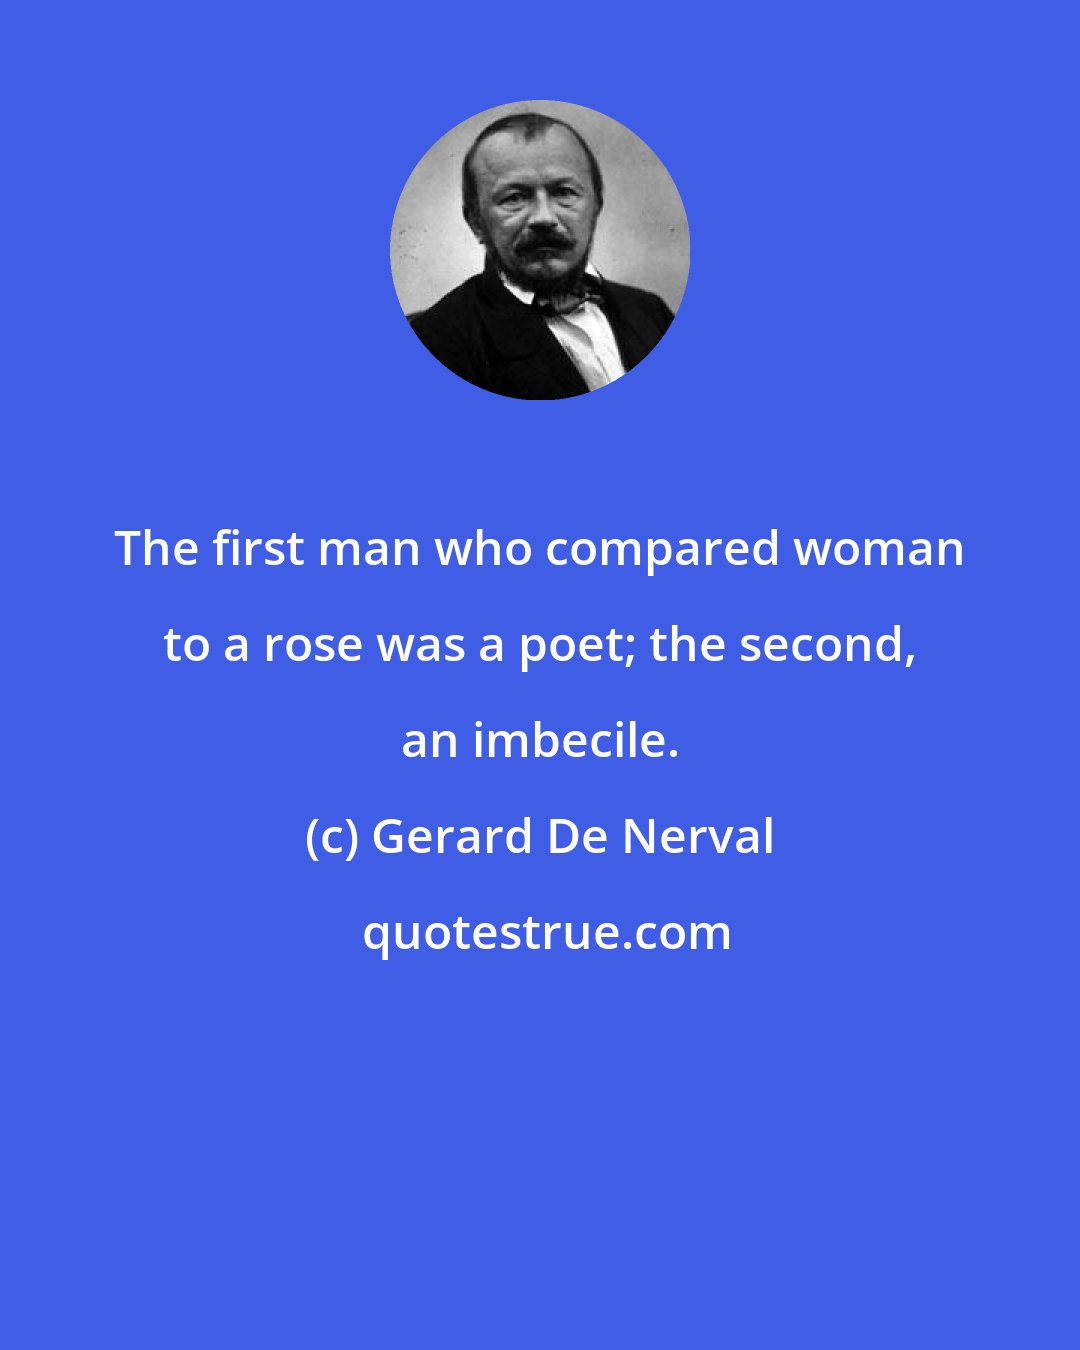 Gerard De Nerval: The first man who compared woman to a rose was a poet; the second, an imbecile.